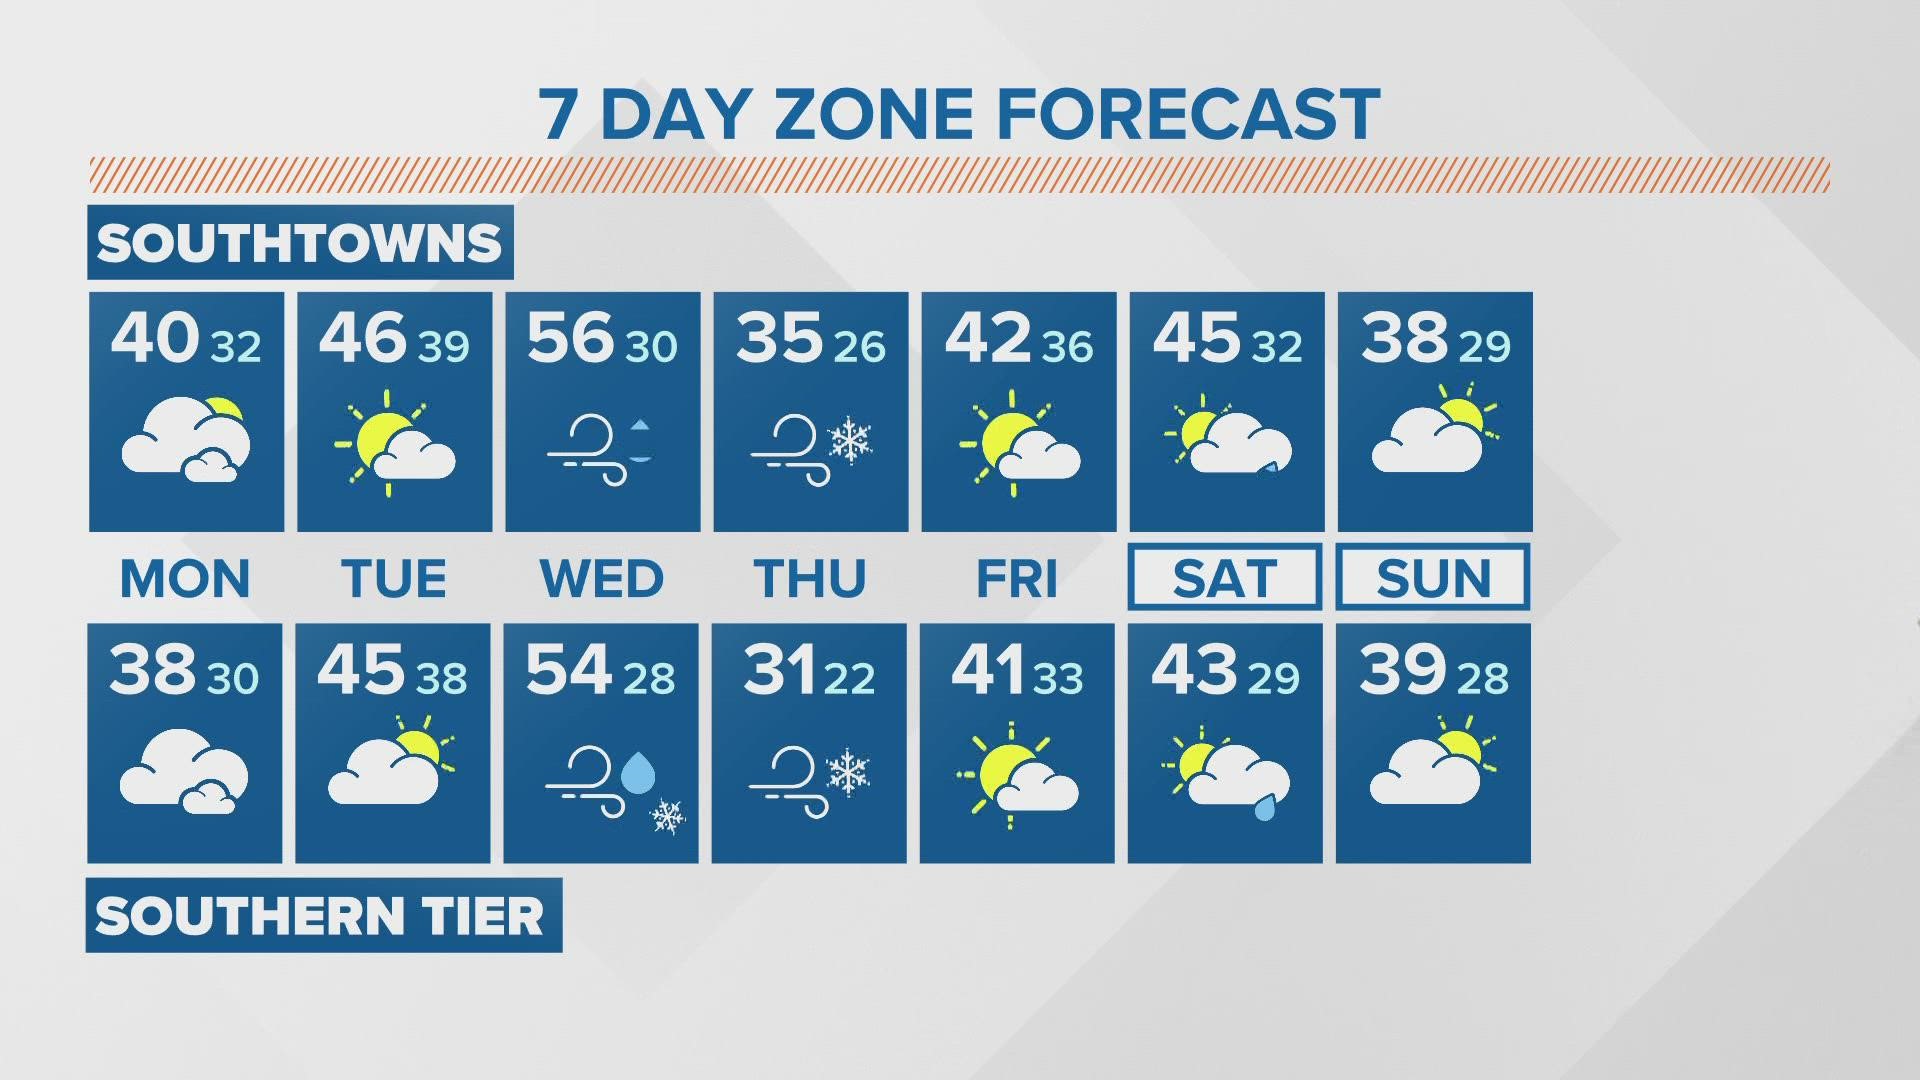 Patrick has a look at your seven-day zone forecast.